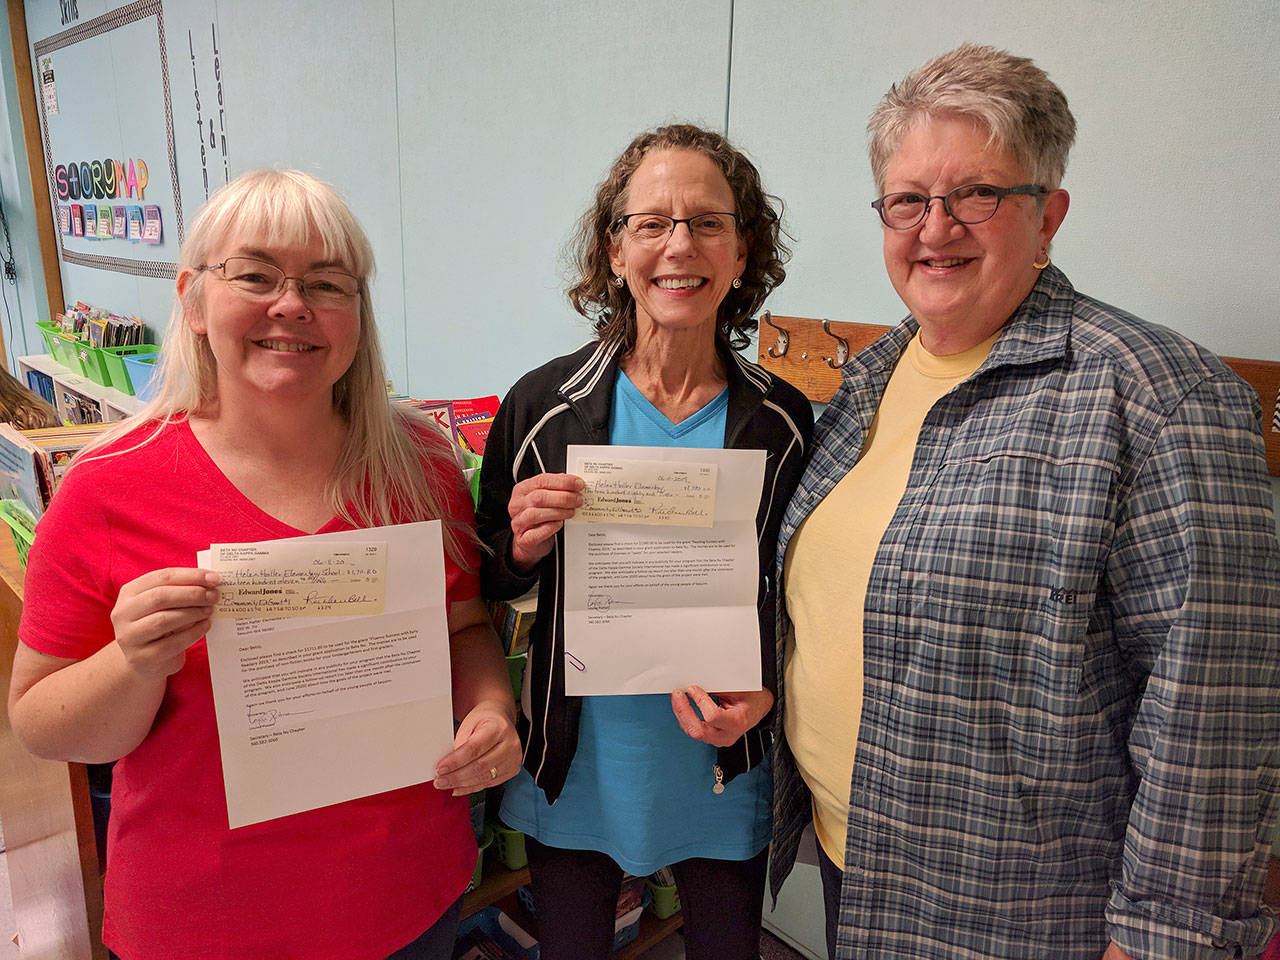 The Beta Nu Chapter of Delta Kappa Gamma recently awarded two grants to help students at Helen Haller Elementary. Pictured, from left, are reading paraeducator Rhonda Cays, reading specialist Betsy Smith and Beta Nu representative Louise Potter. Submitted photo